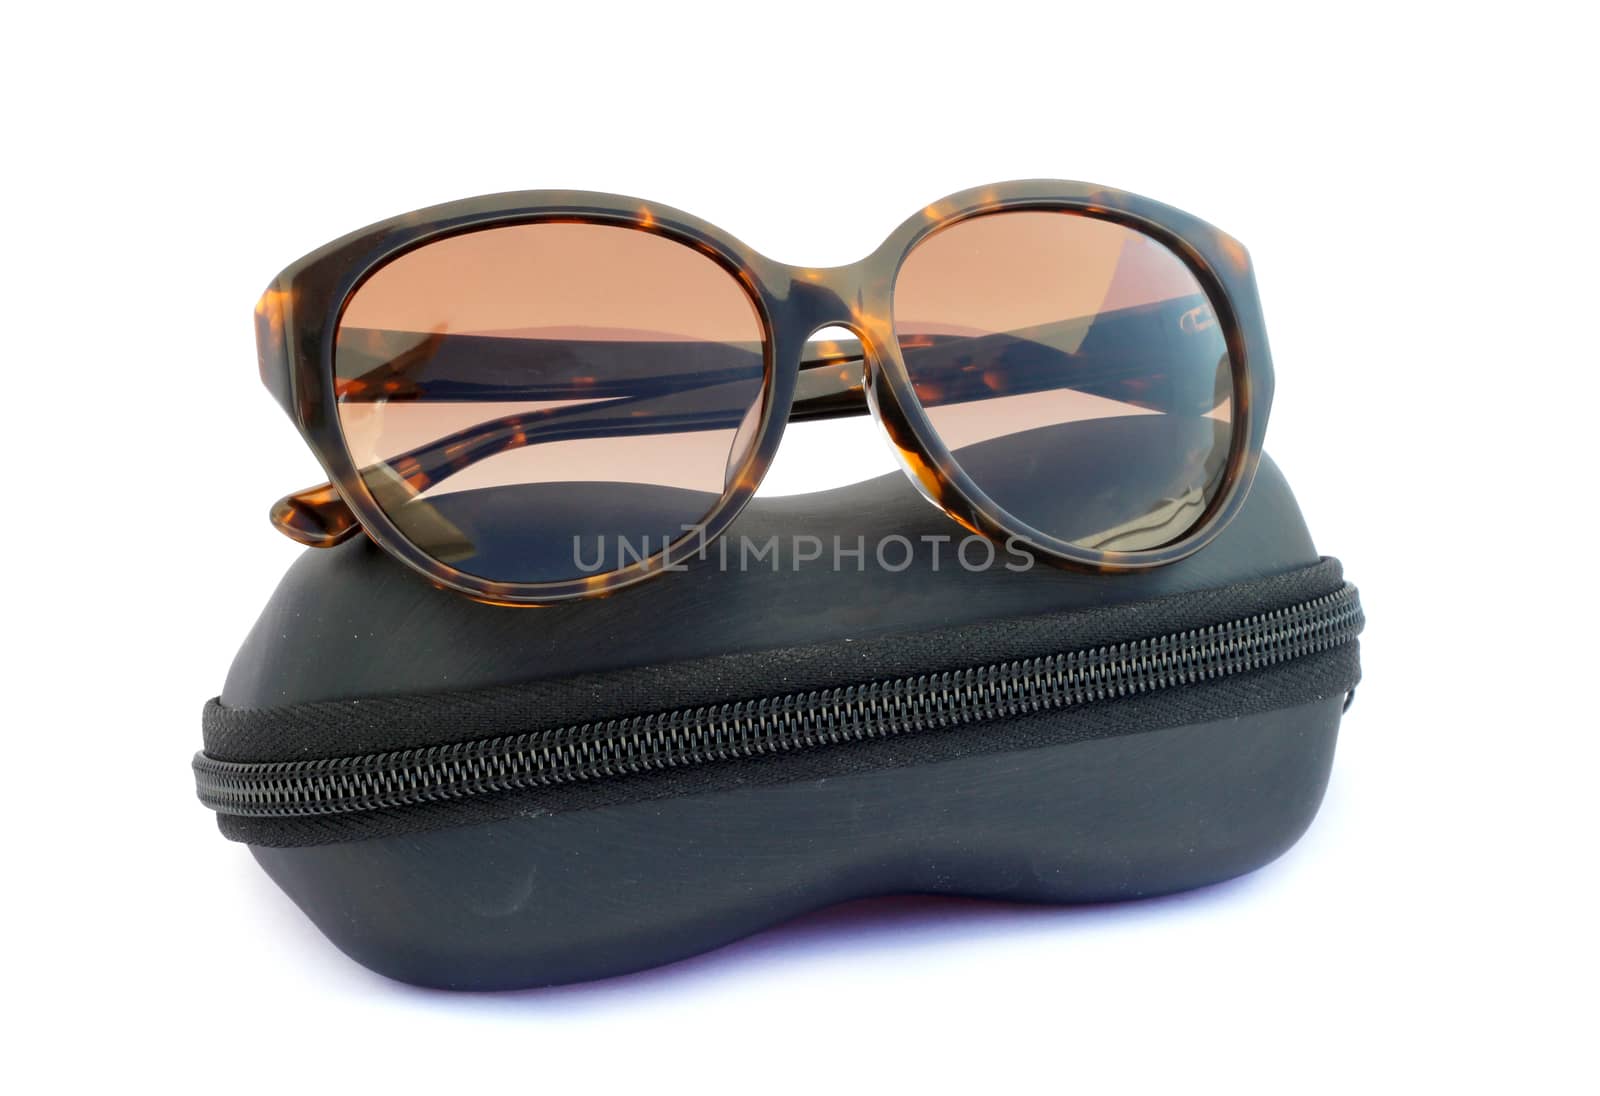 Image of sunglasses and black box on a white background by yod67